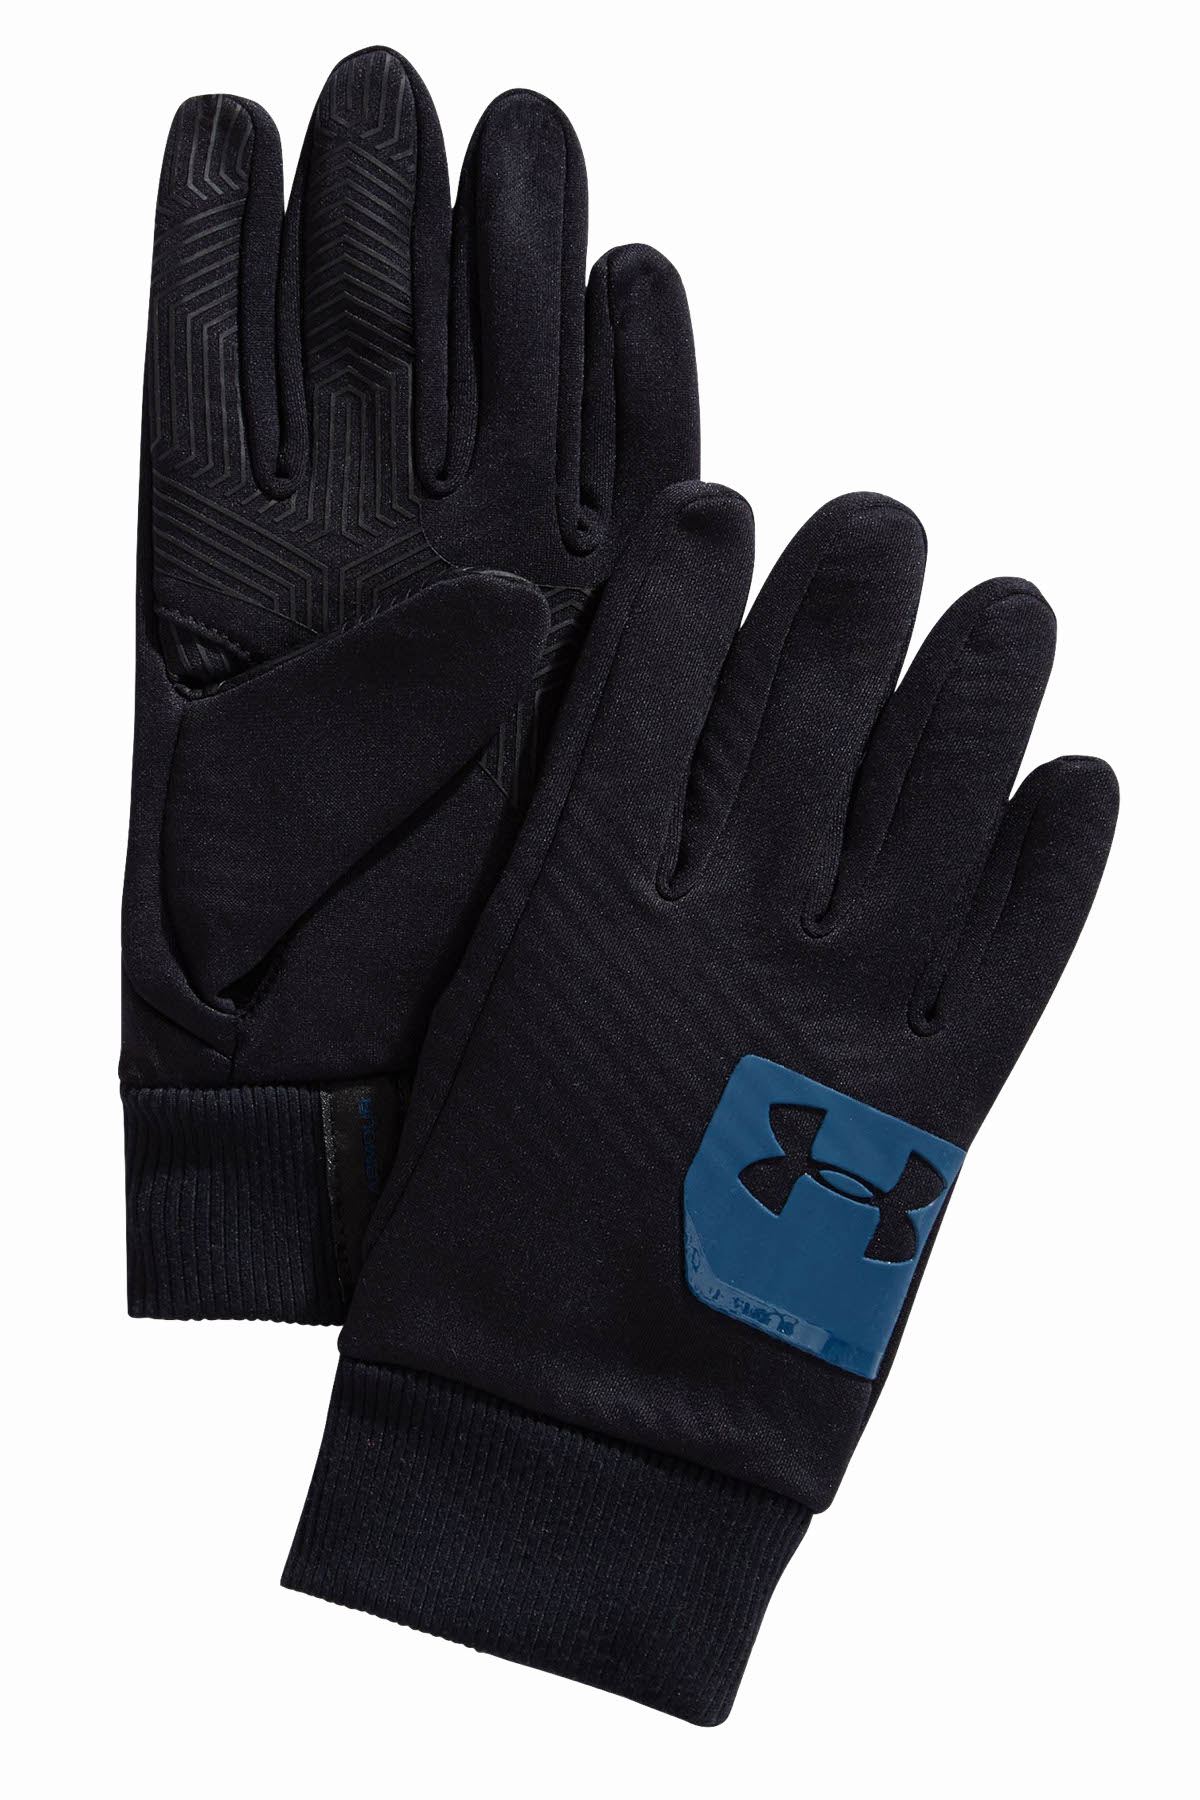 Under Armour Black/Blue ColdGear Infrared Tech-Touch Core Gloves